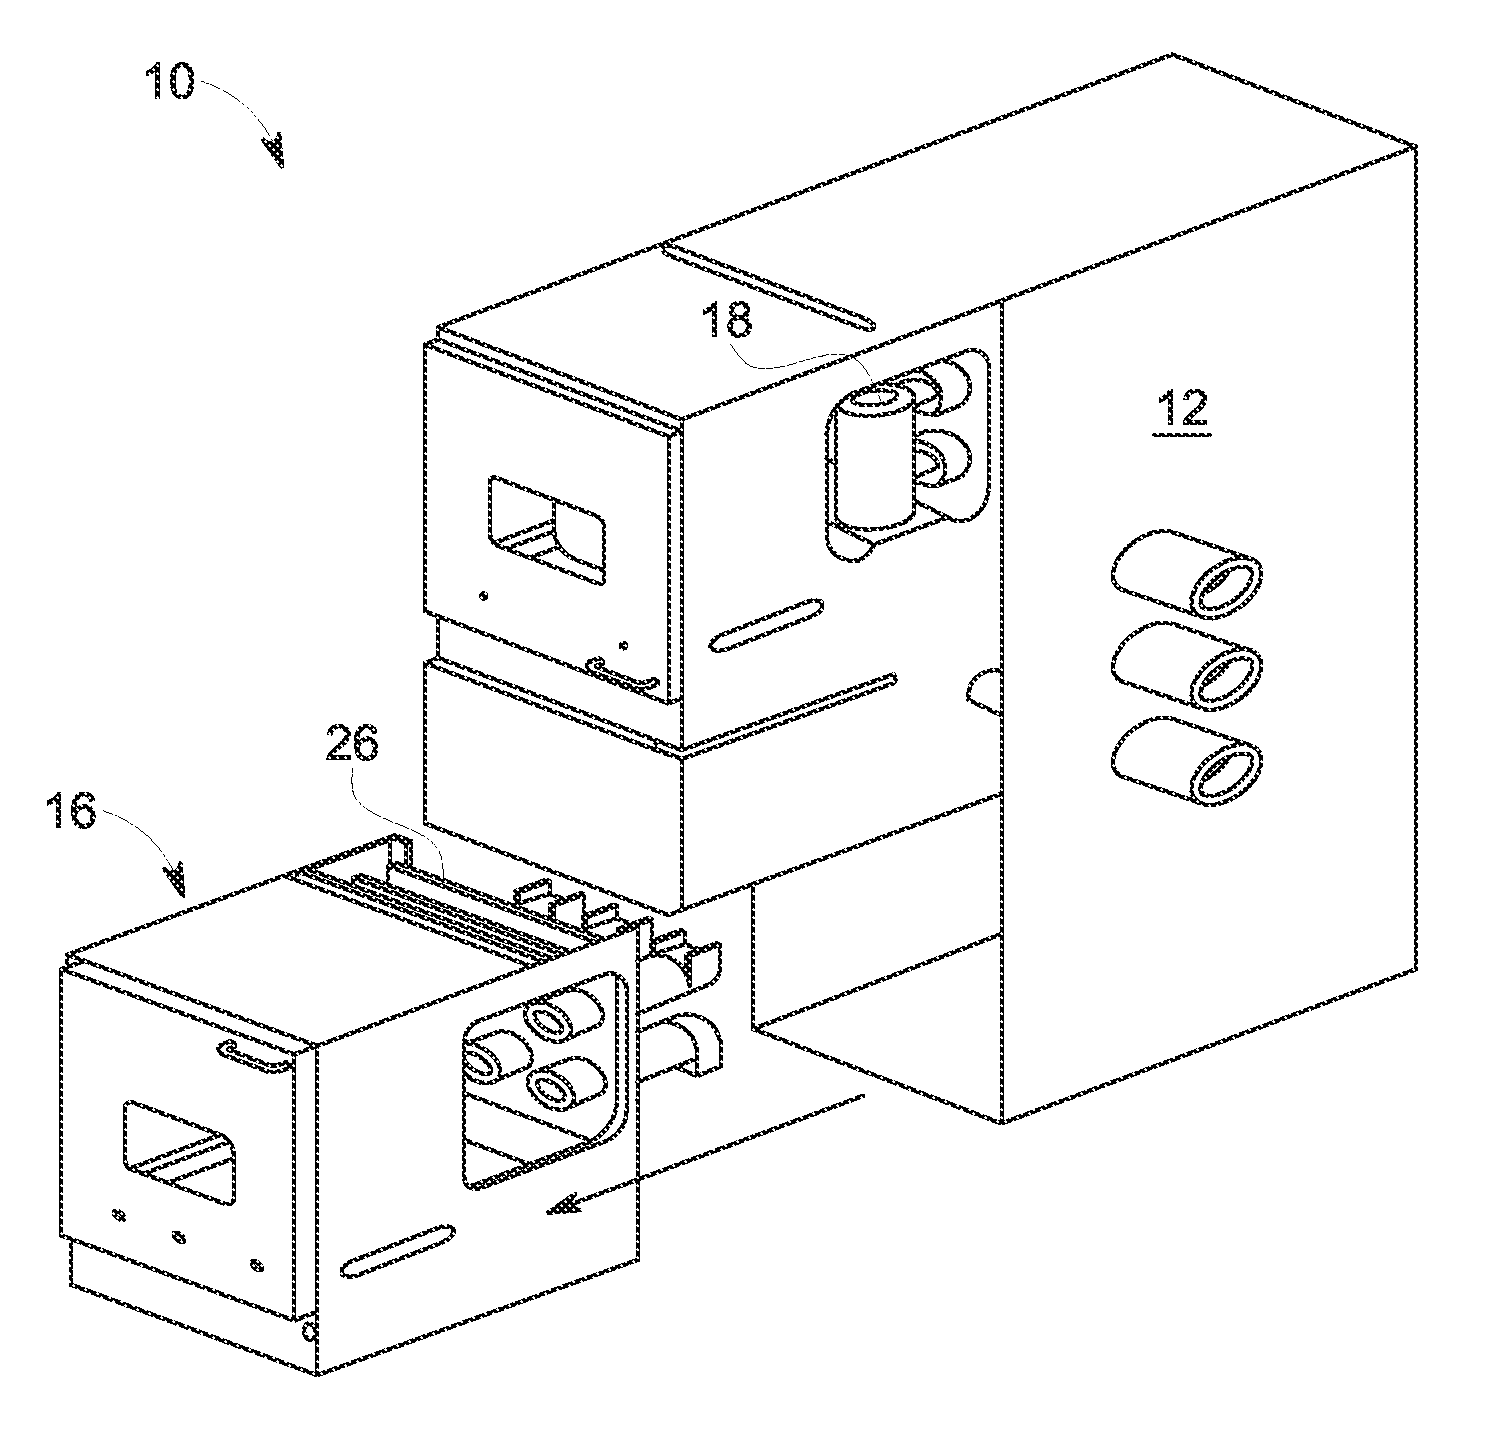 Modular switchgear connection and method of electrically connecting a modular compartment to a switchgear assembly